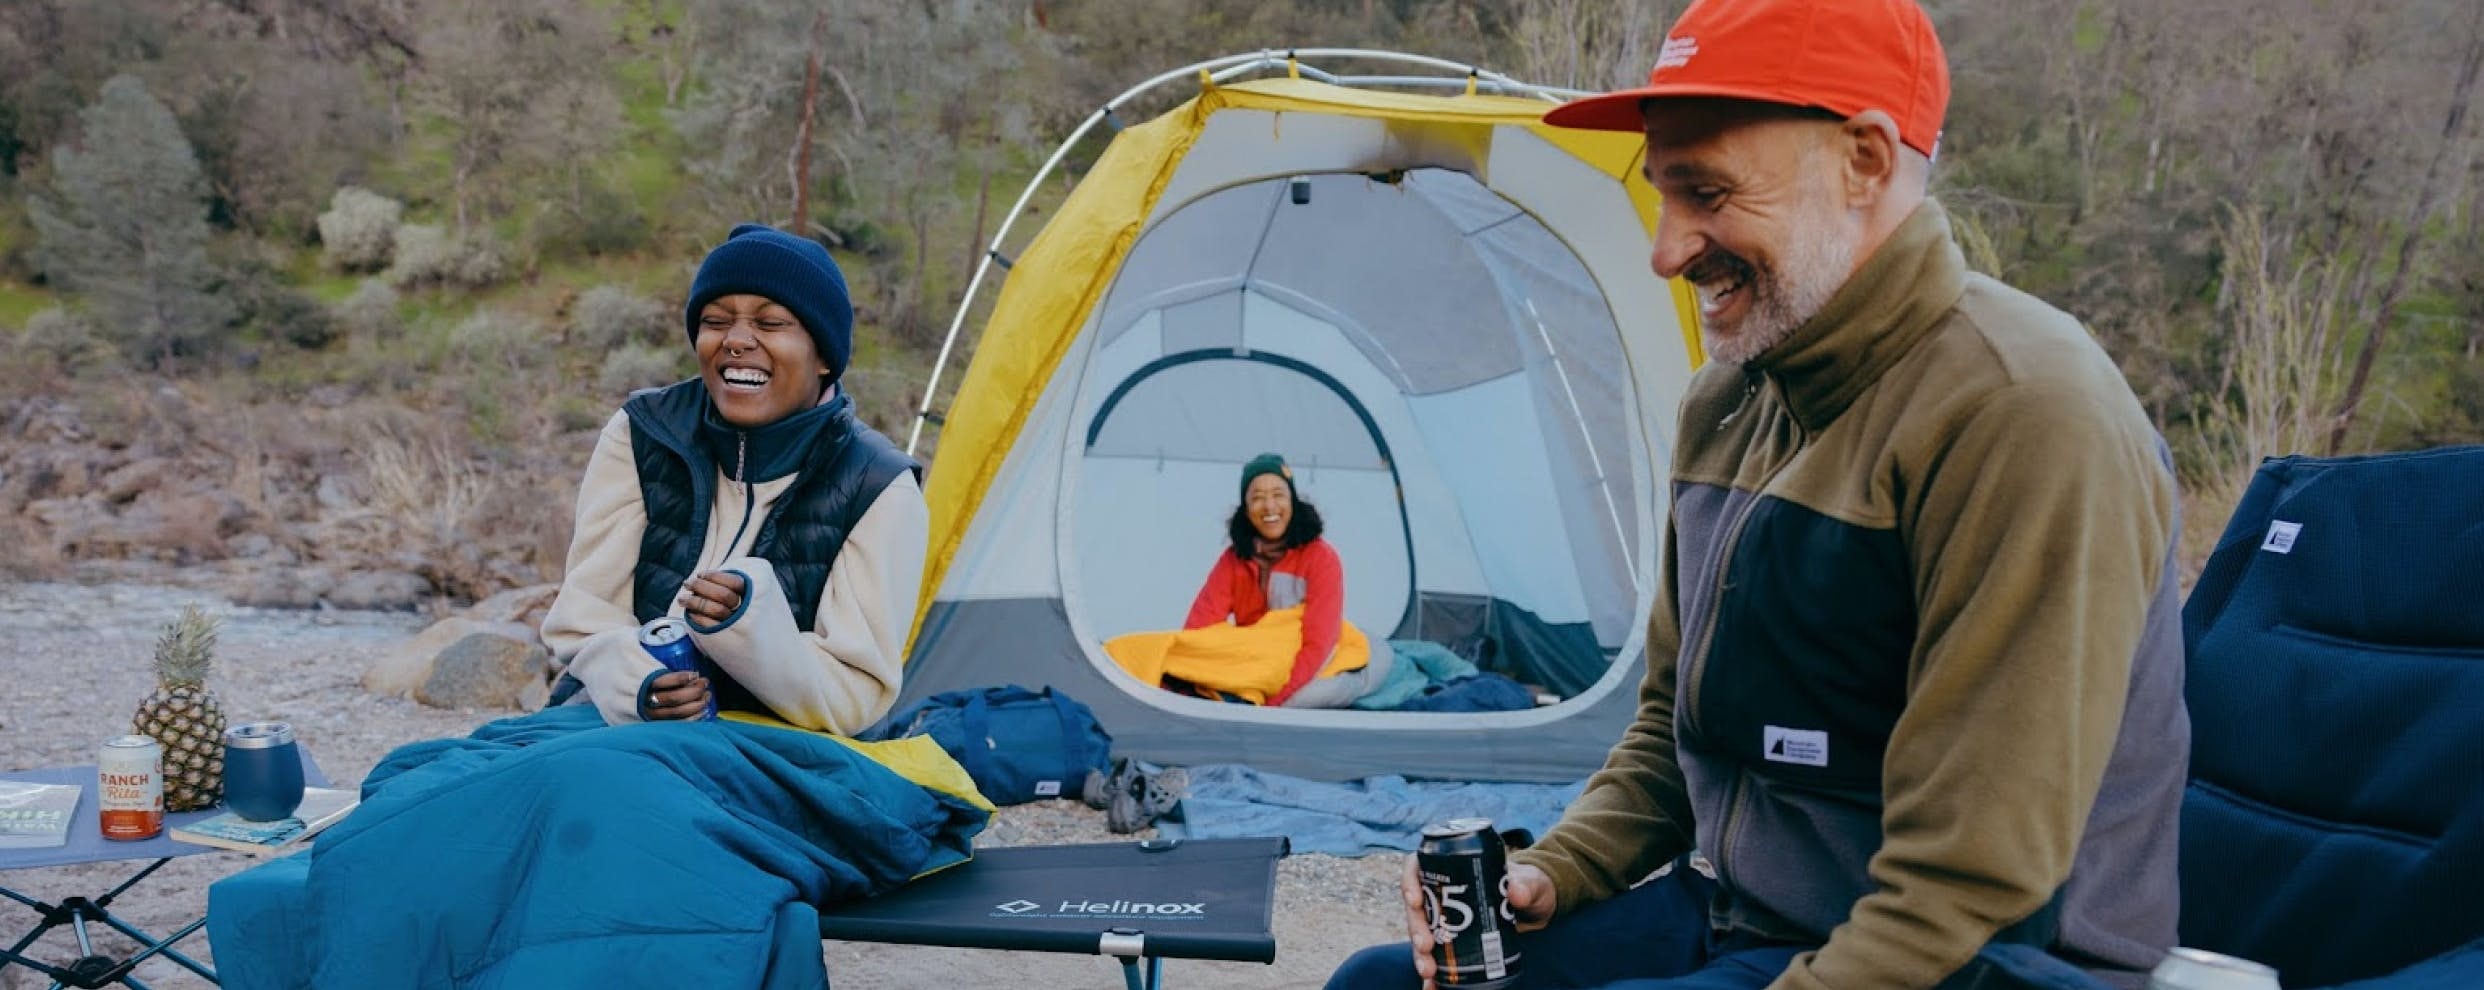 Camping Offers - Save on MEC camp gear, gaiters, energy bars and more.